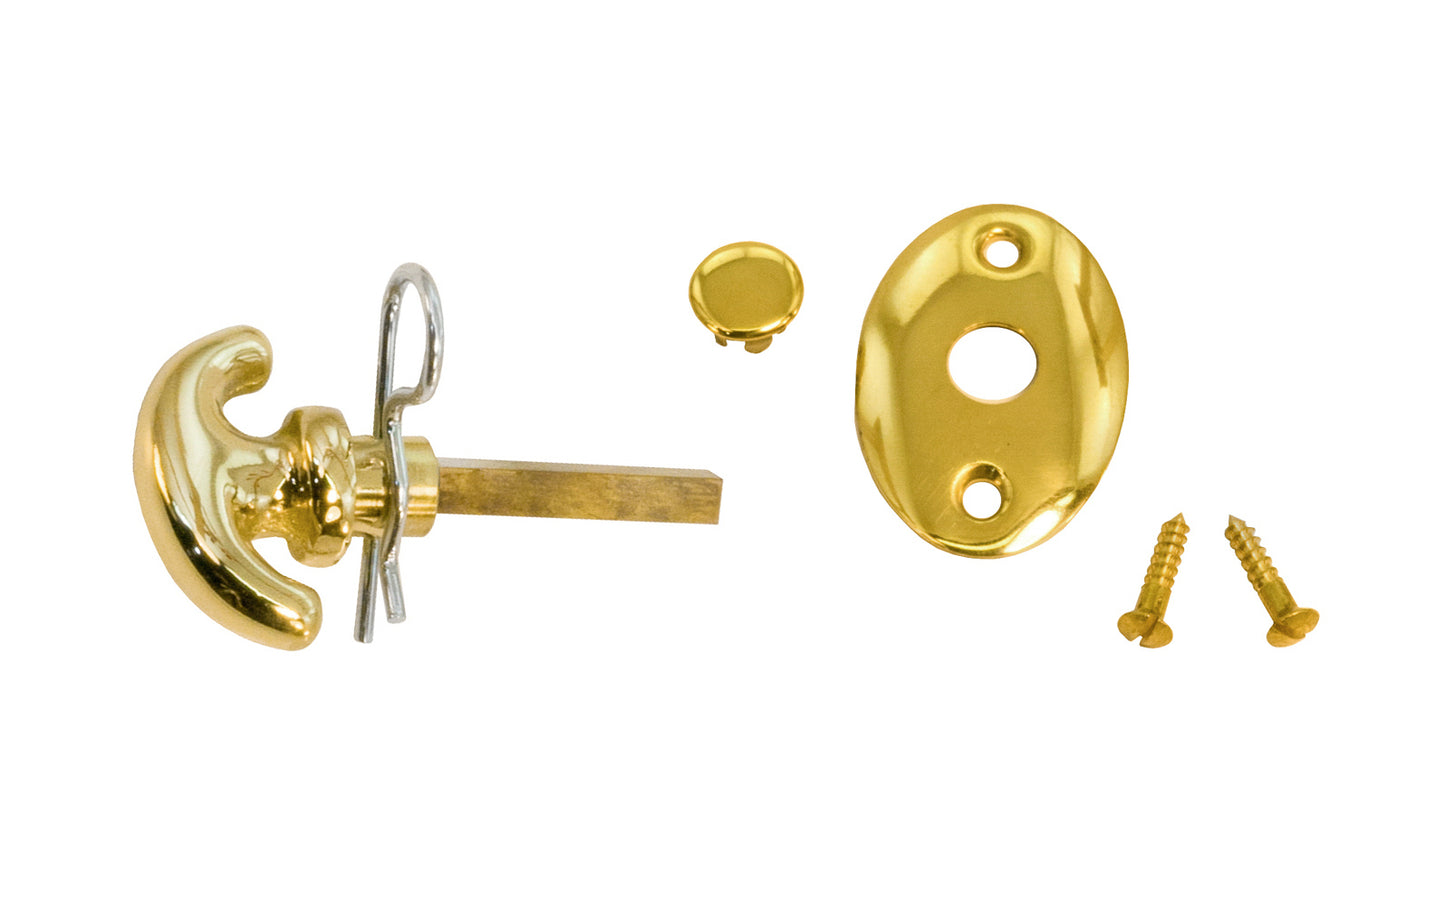 Traditional classic emergency release thumbturn Key & oval plate with 3/16" square spindle shaft. Thumb Turn Key provides outside emergency release for deadbolts, especially for the Classic Brass Interior Mortise Lock Set With Thumbturn. Emergency unlocking key. Deadbolt key for mortise locks. Vintage-style Hardware. Lacquered Brass